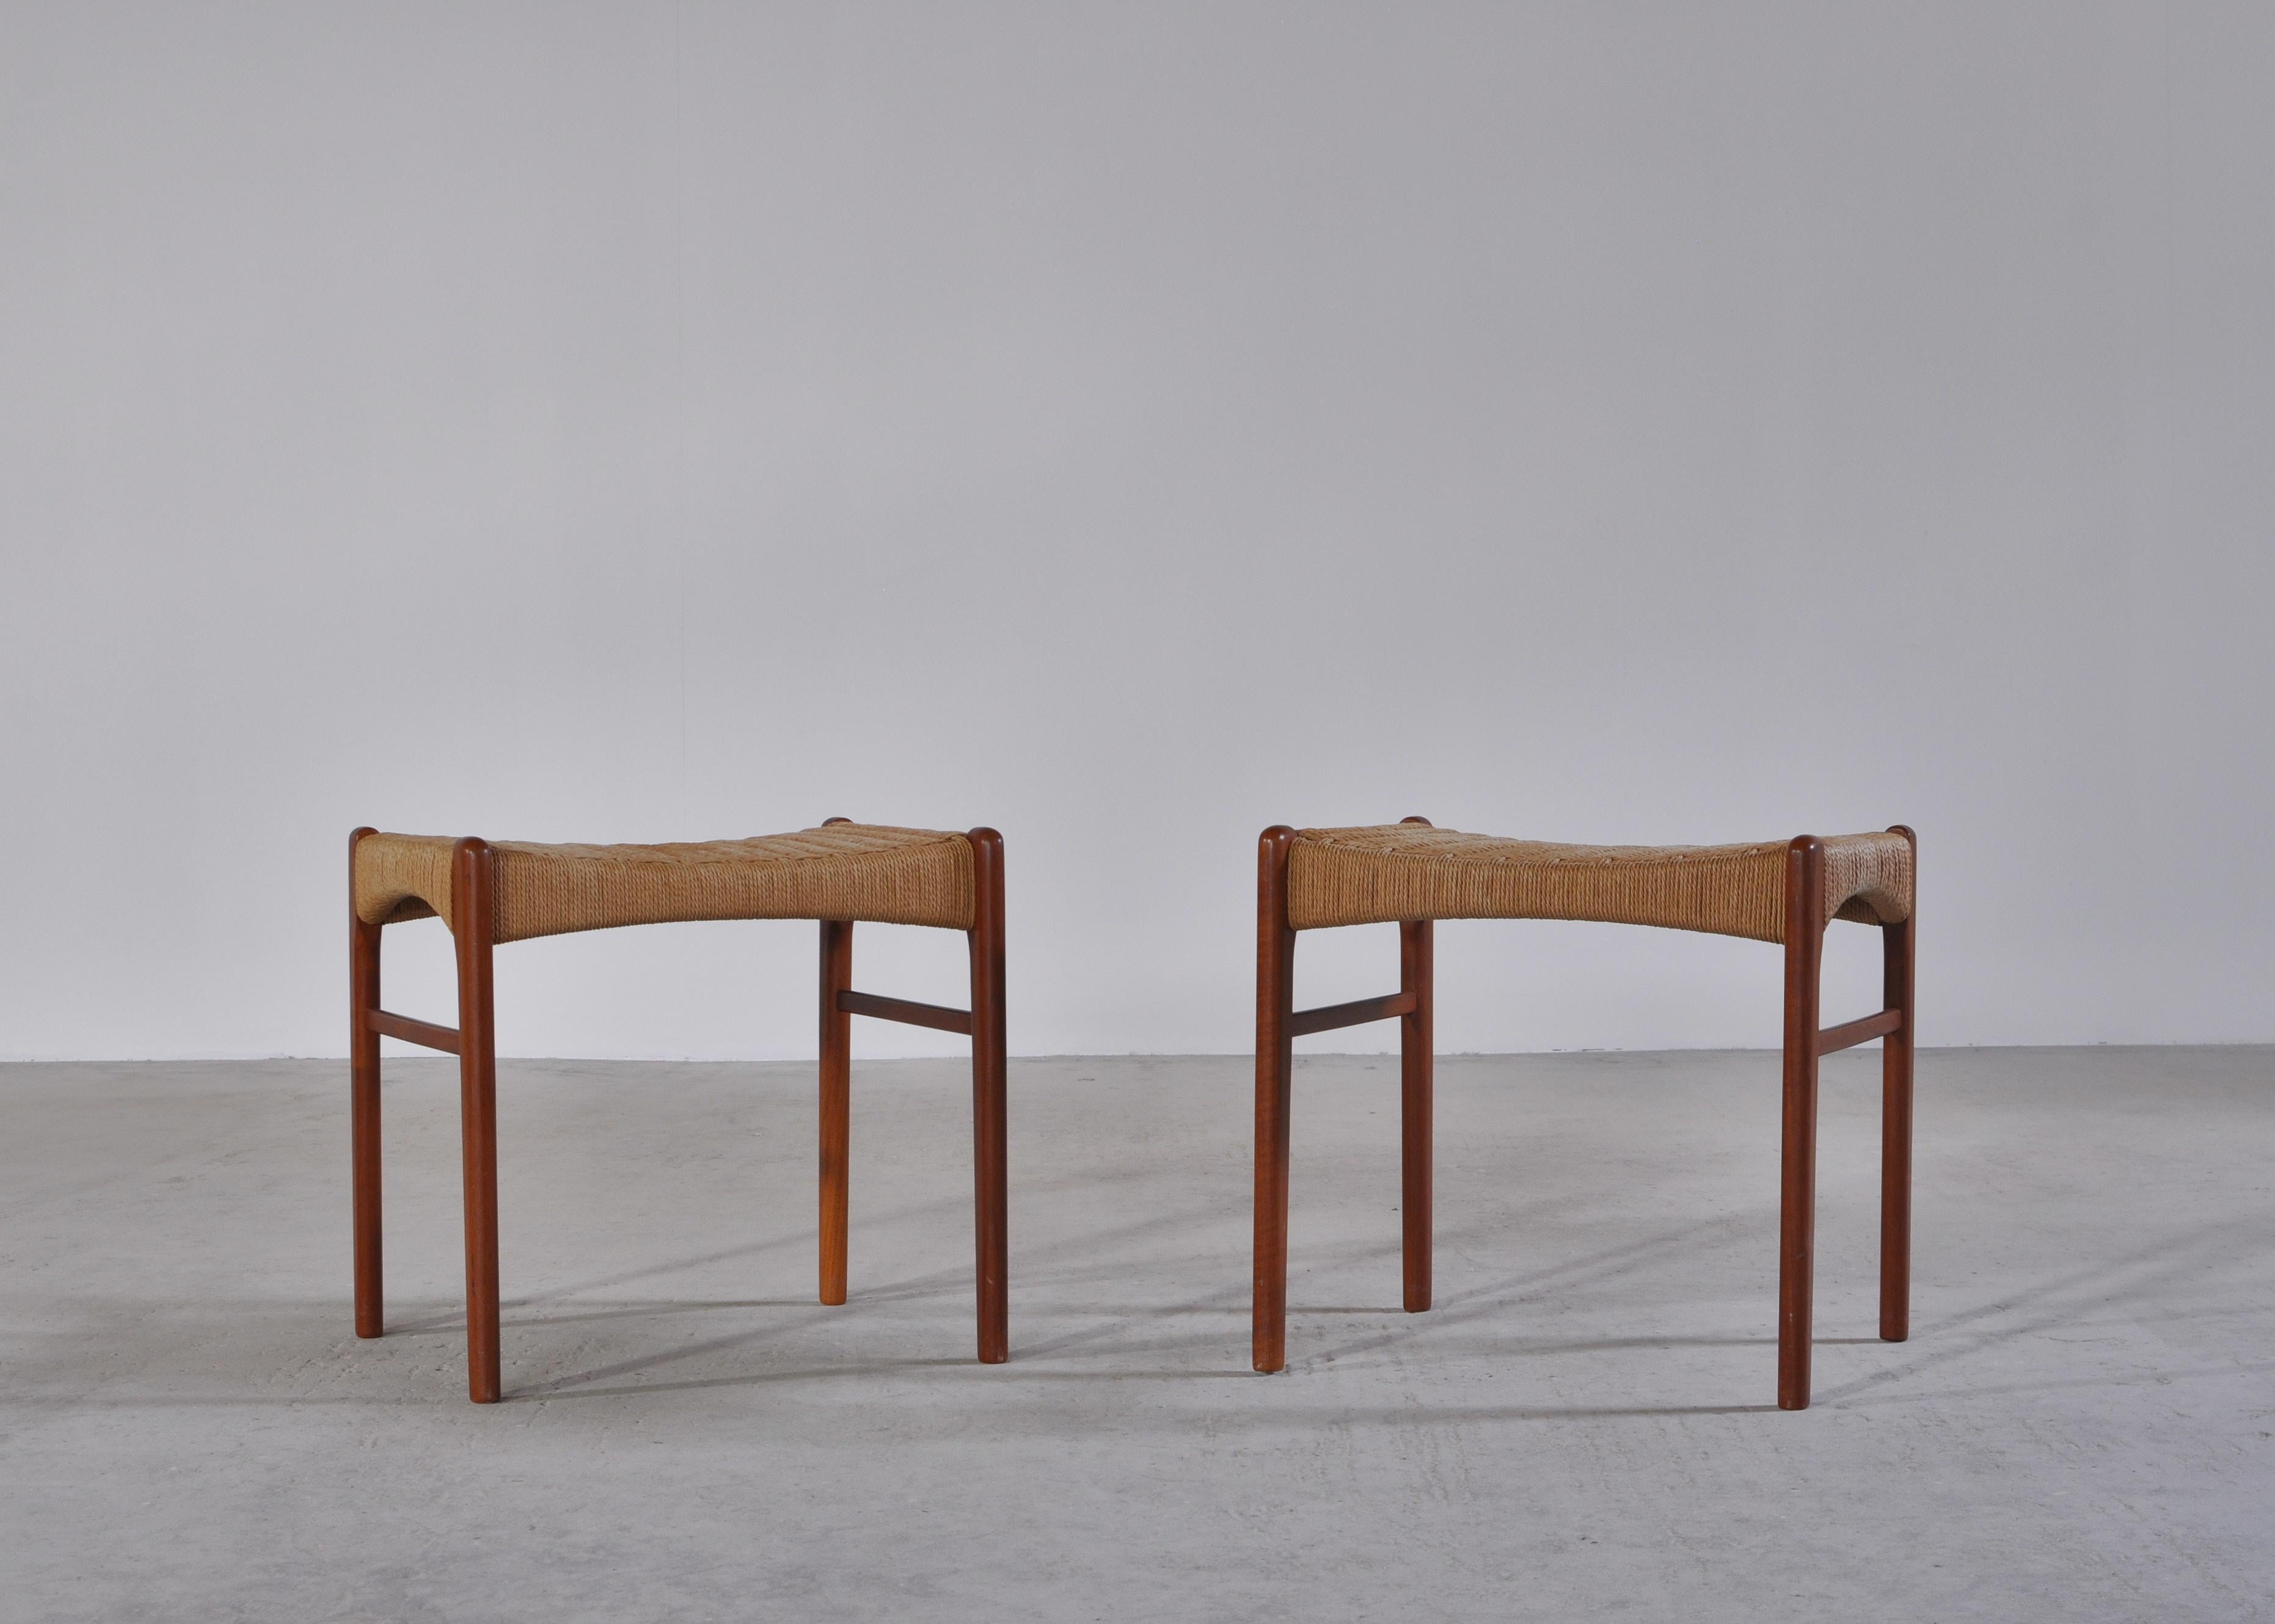 Pair of rare vintage Danish modern stools in teak wood and papercord designed by Arne Wahl Iversen made at 